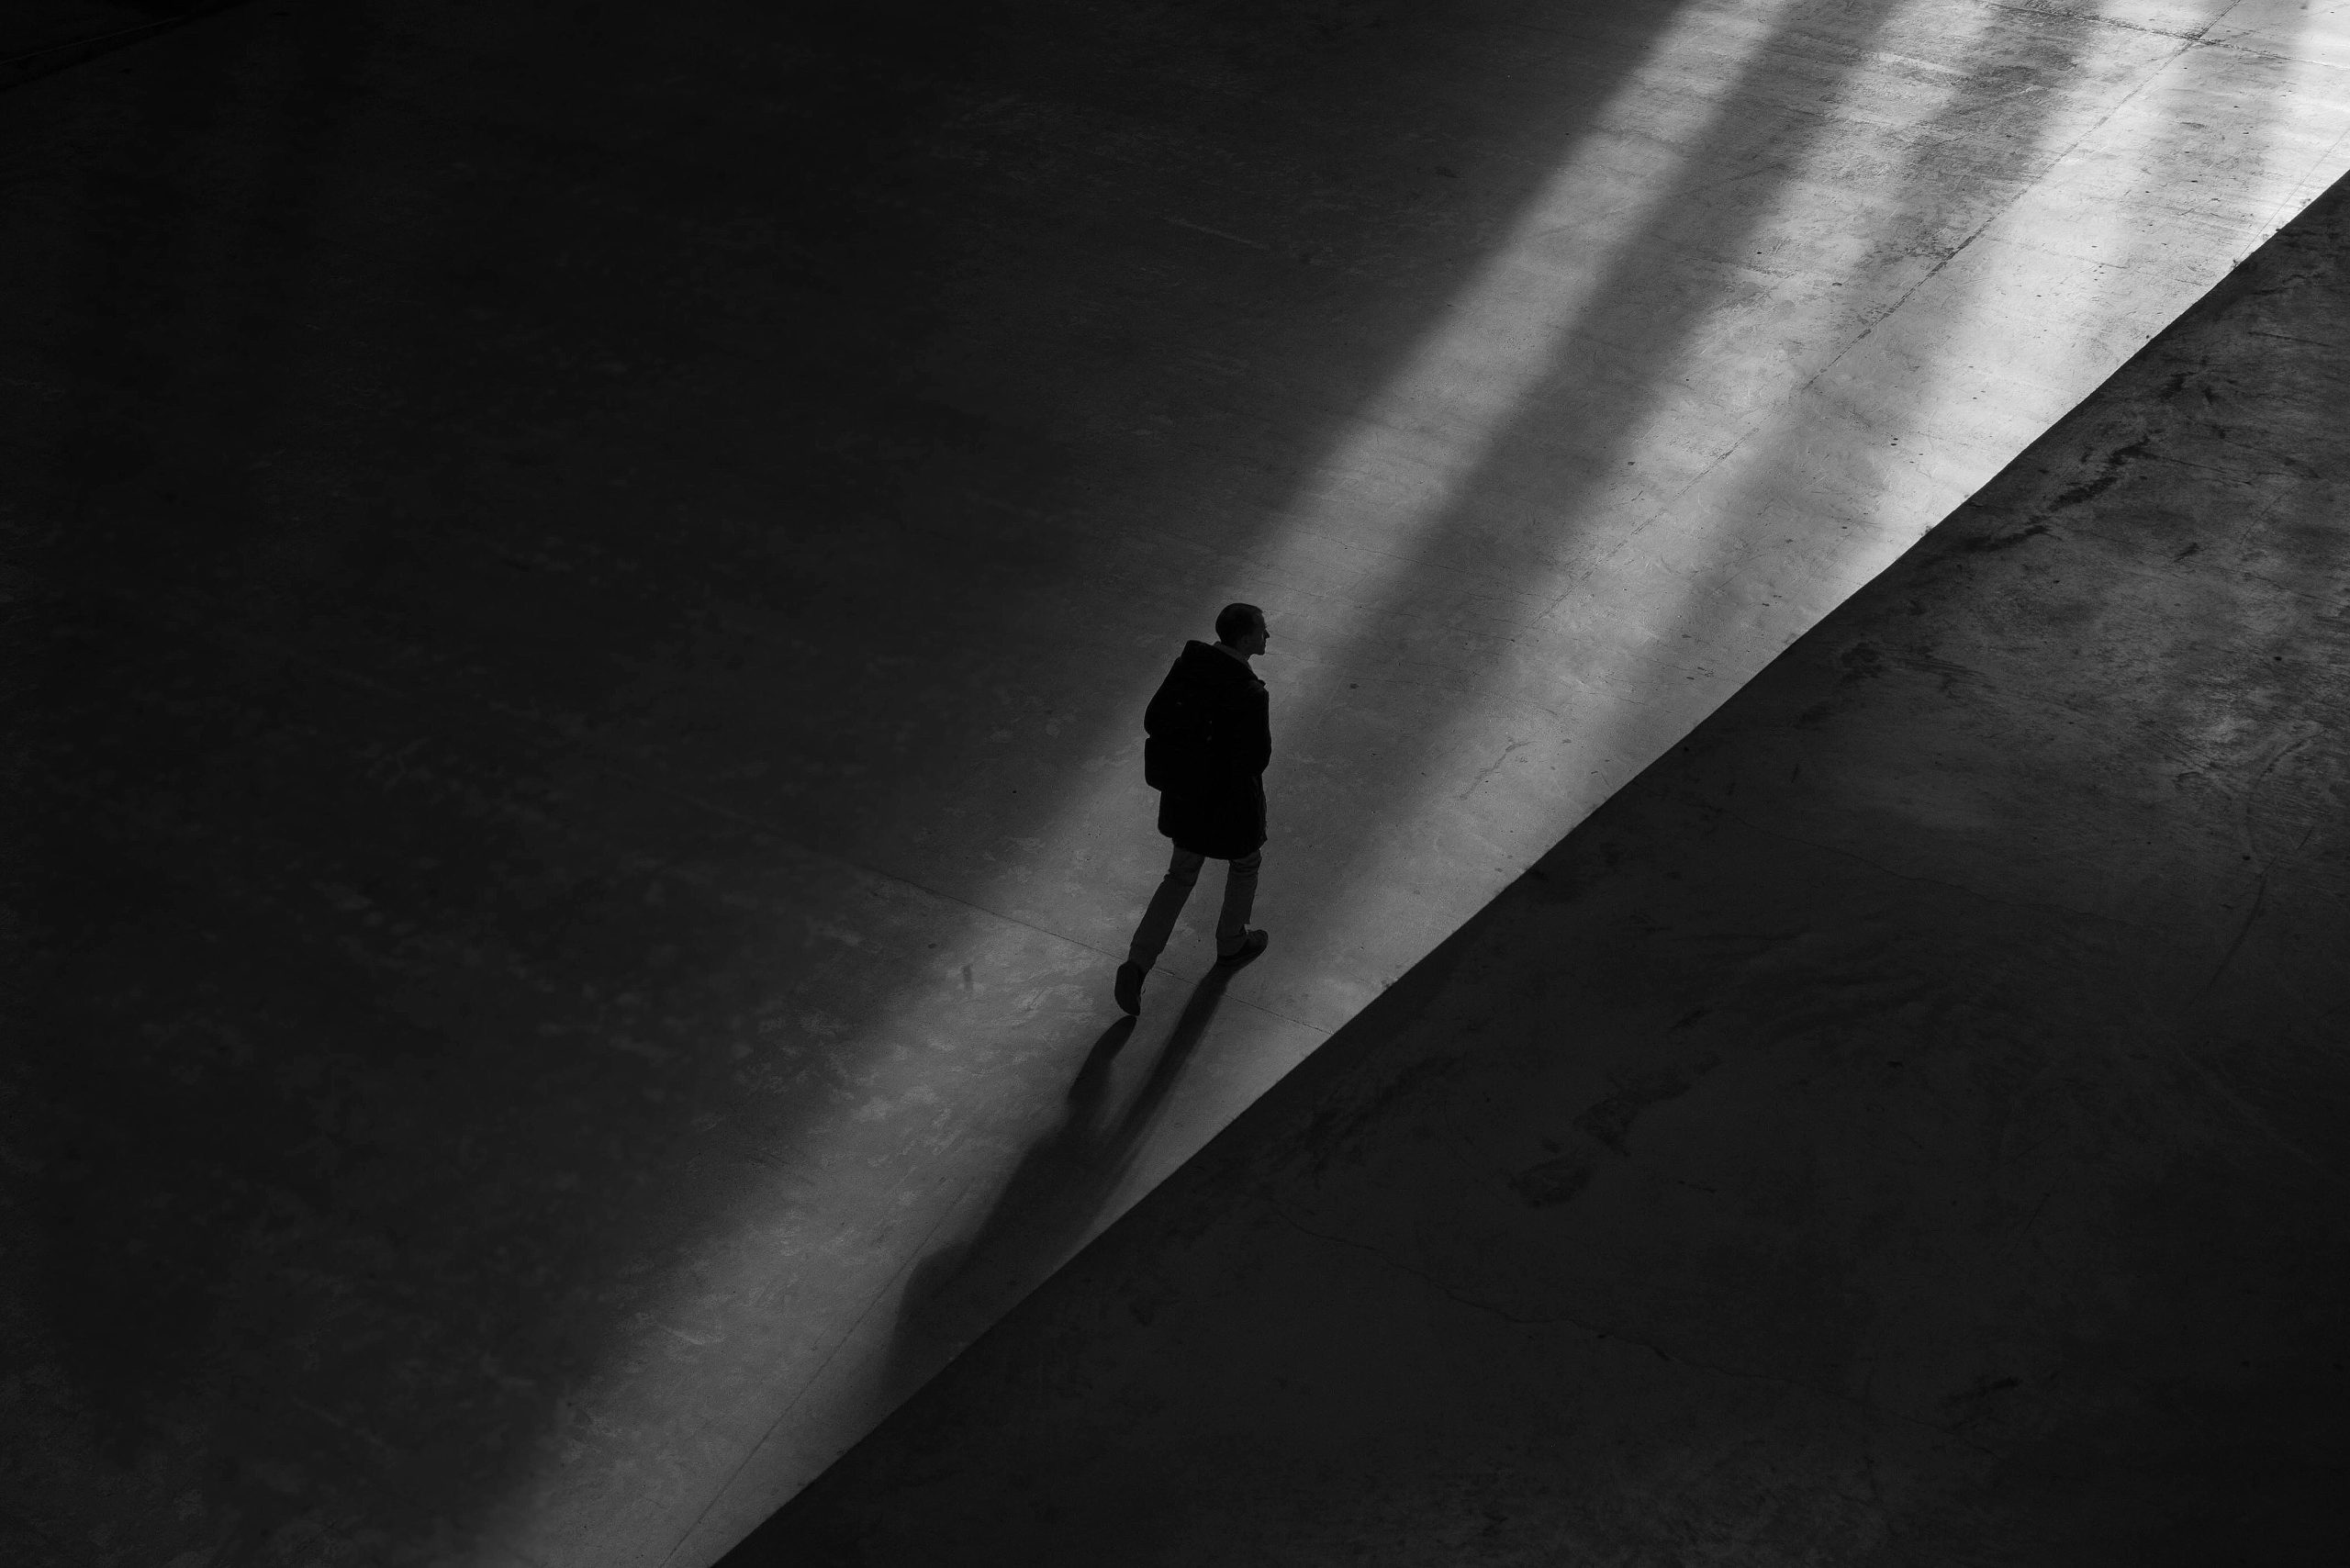 Silhouette walking away from light source